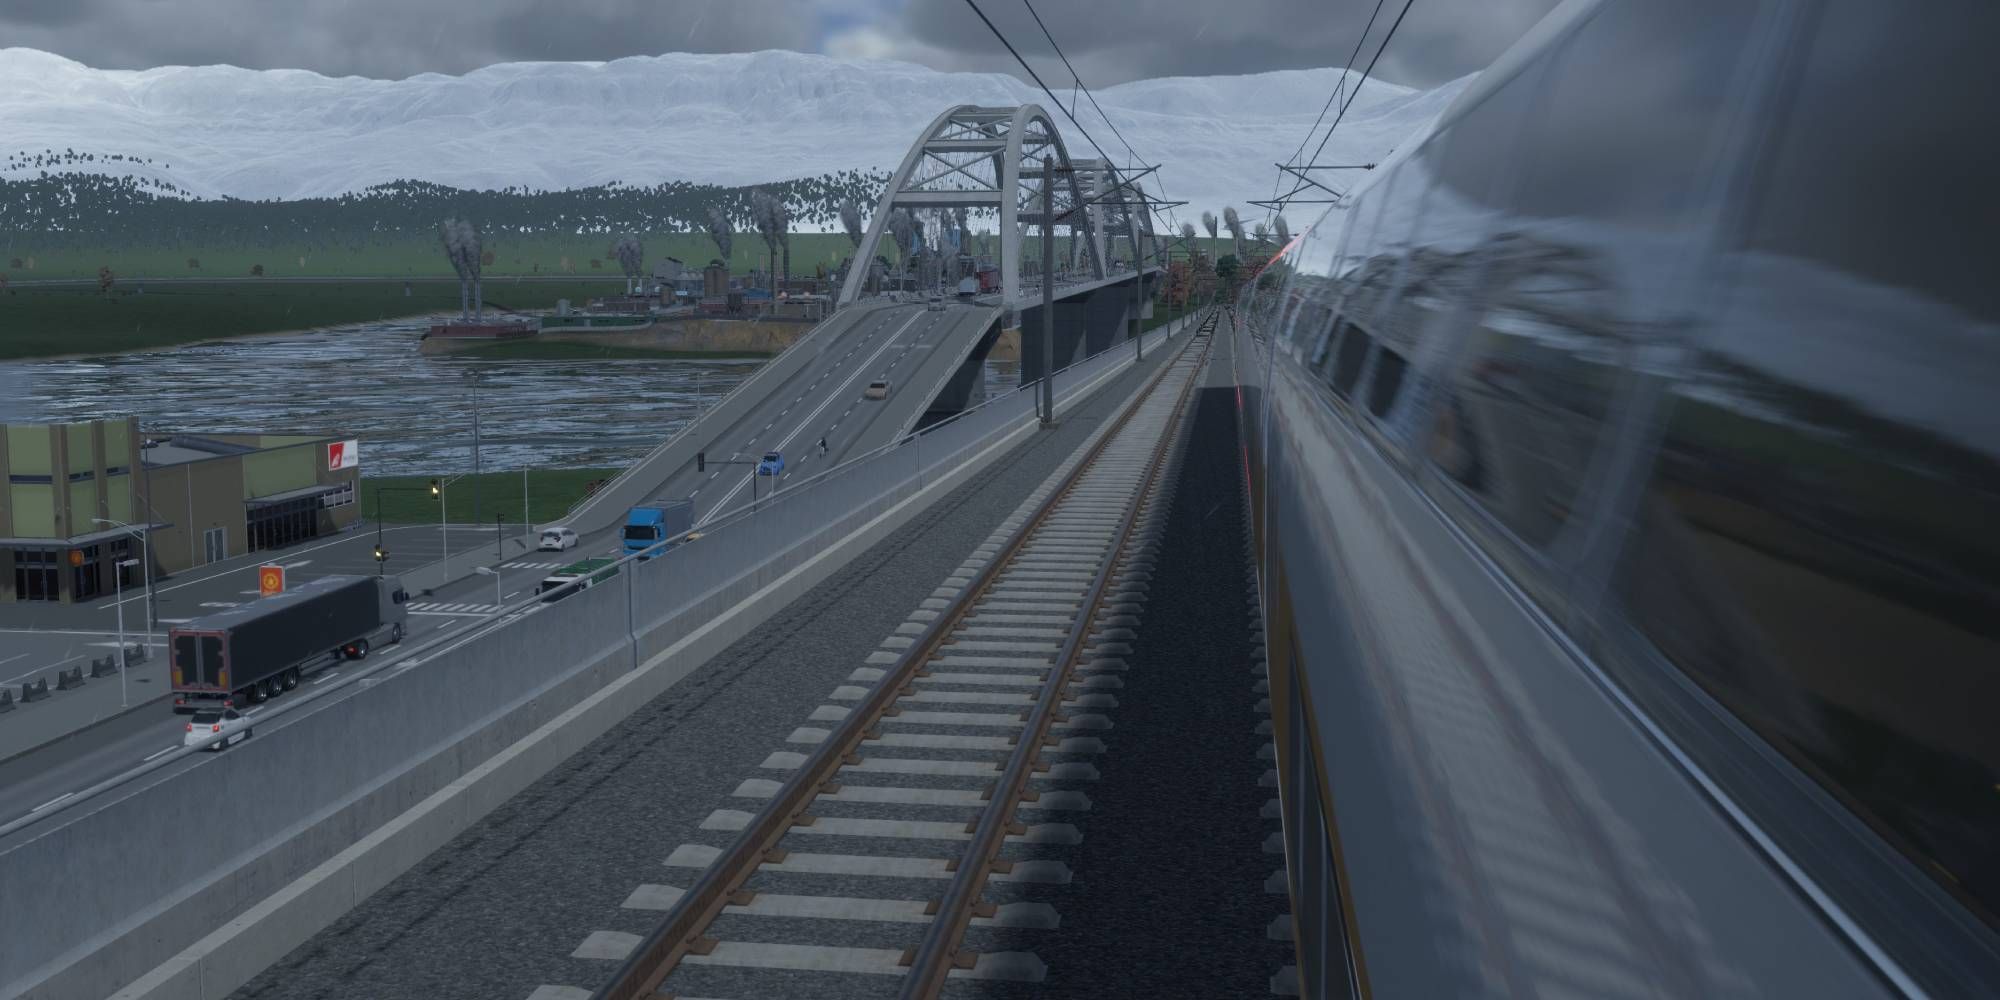 Cities Skylines 2 train on the tracks with factories in the background